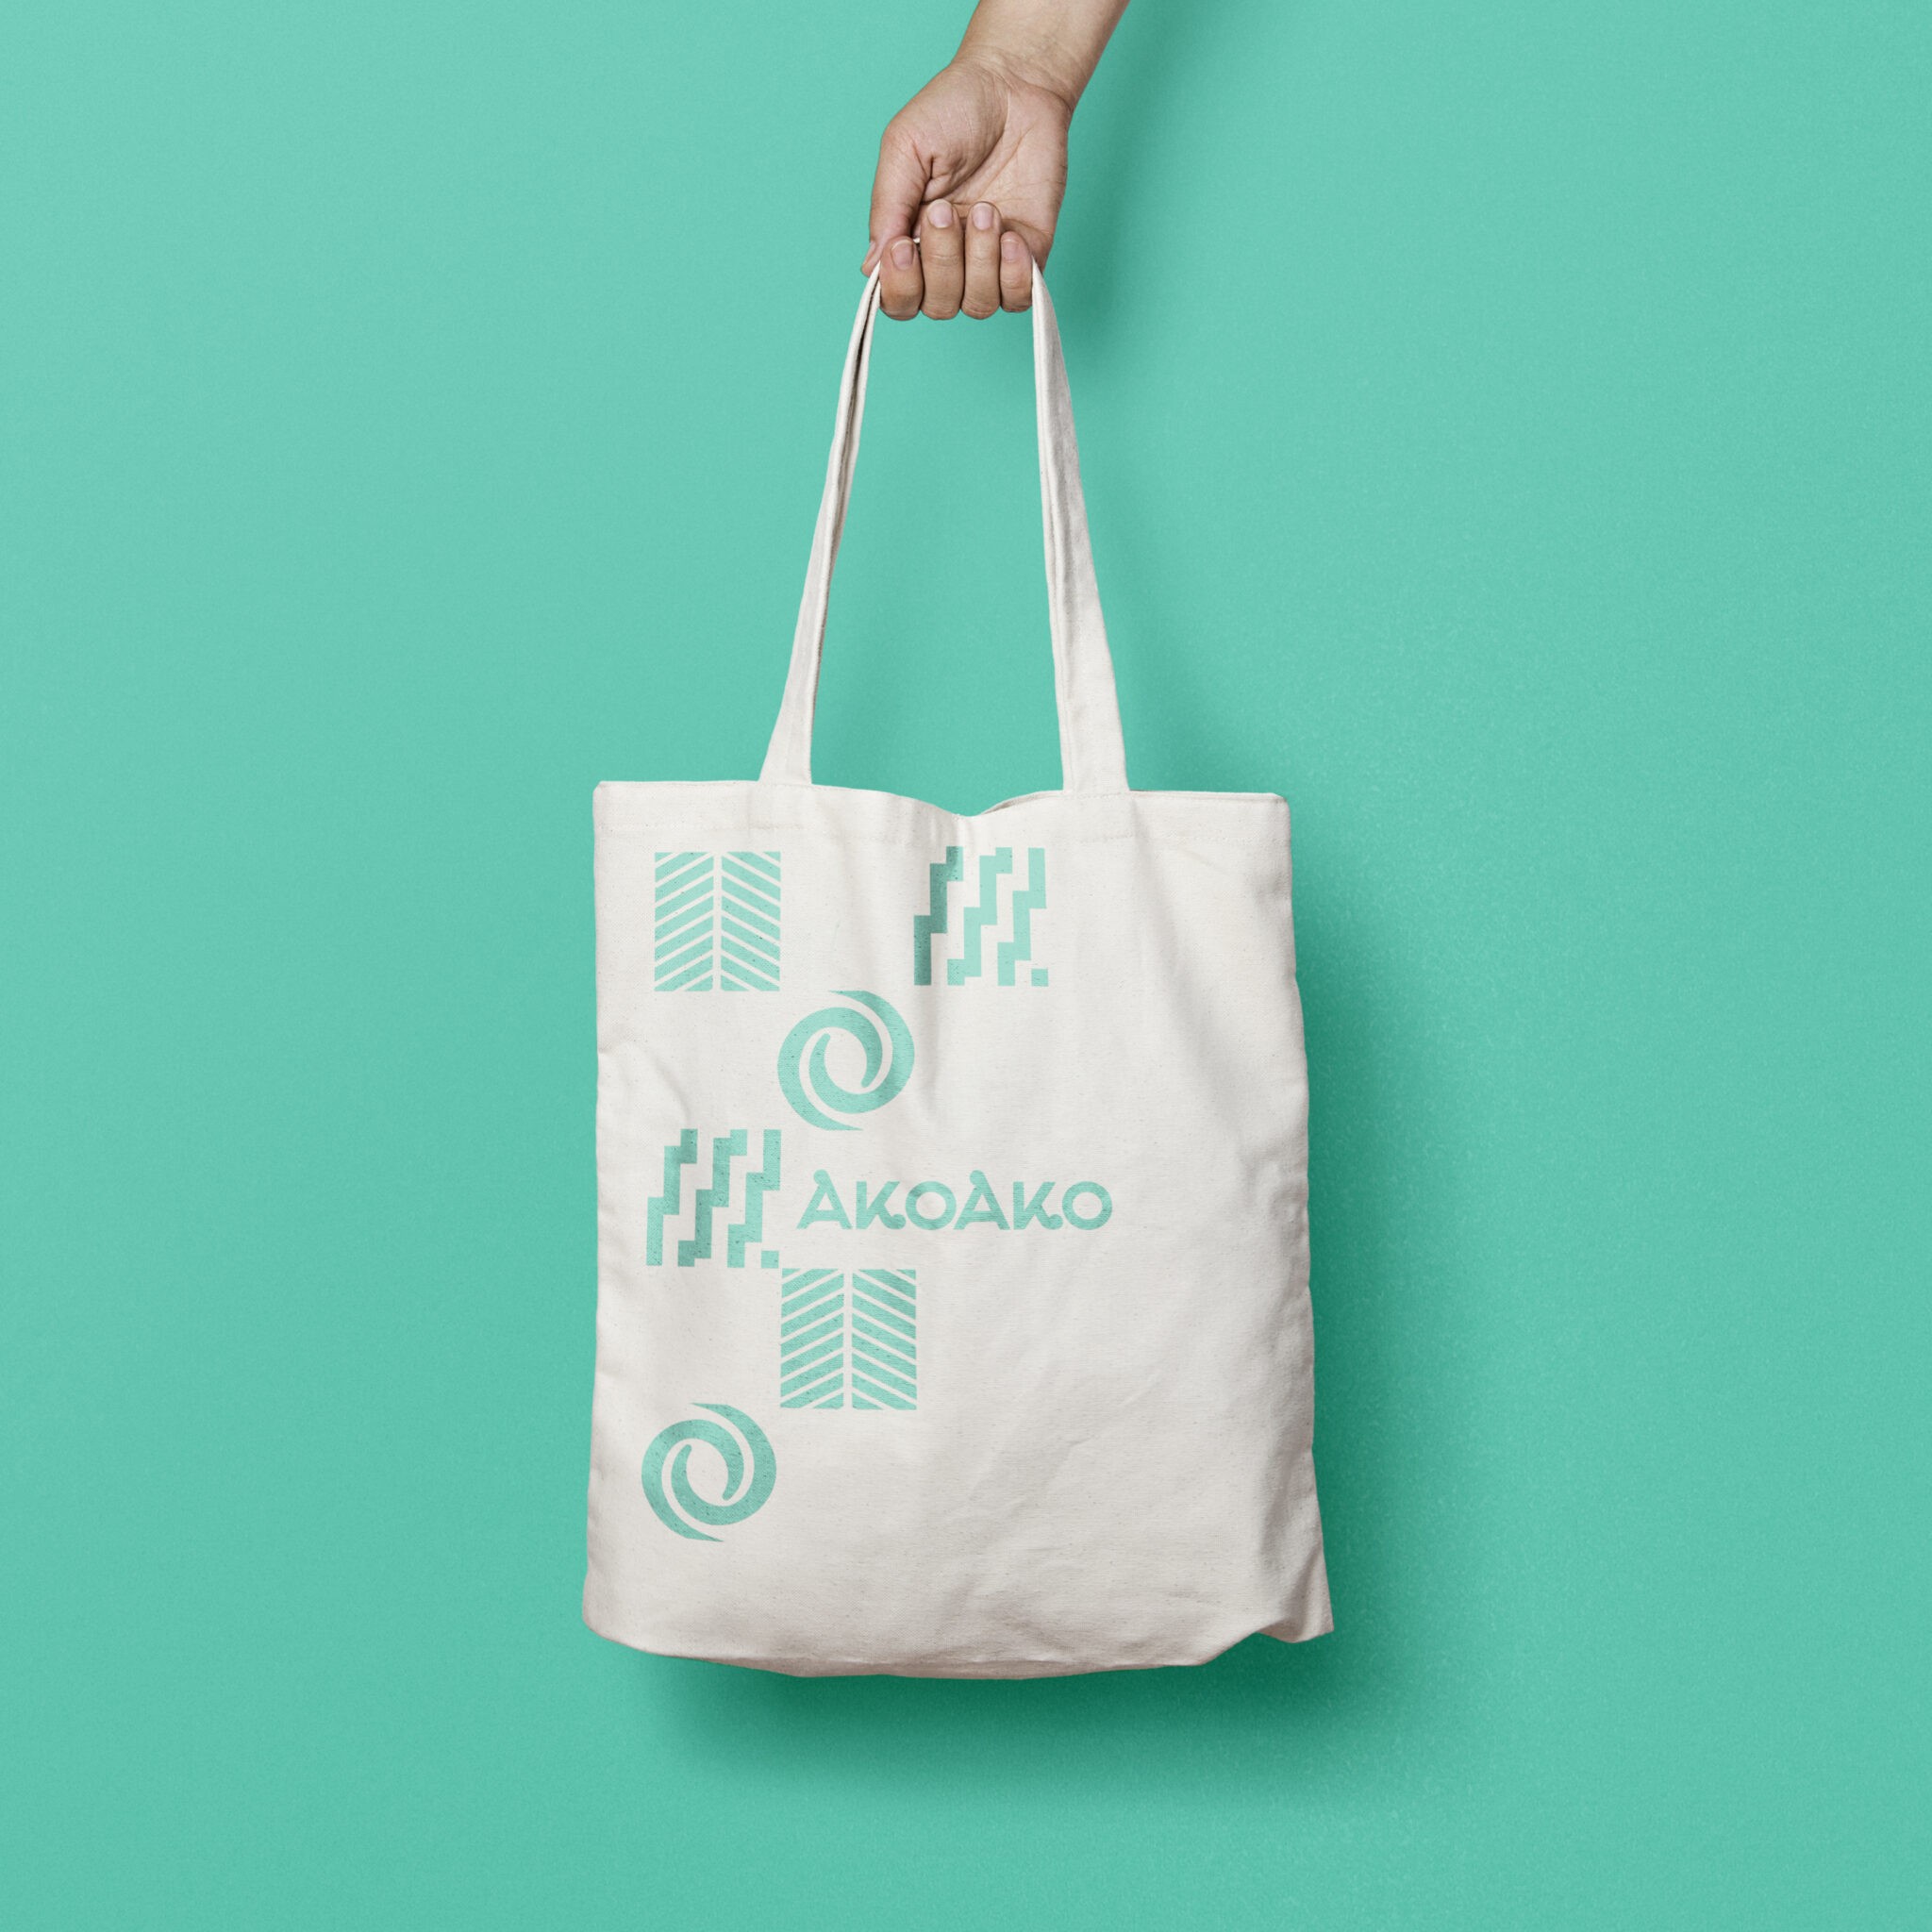 A mockup of a tote bag with a teal background featuring a branding with a Maori pattern. The pattern consists of a series of teal-coloured shapes and features the brand’s name AkoAko.